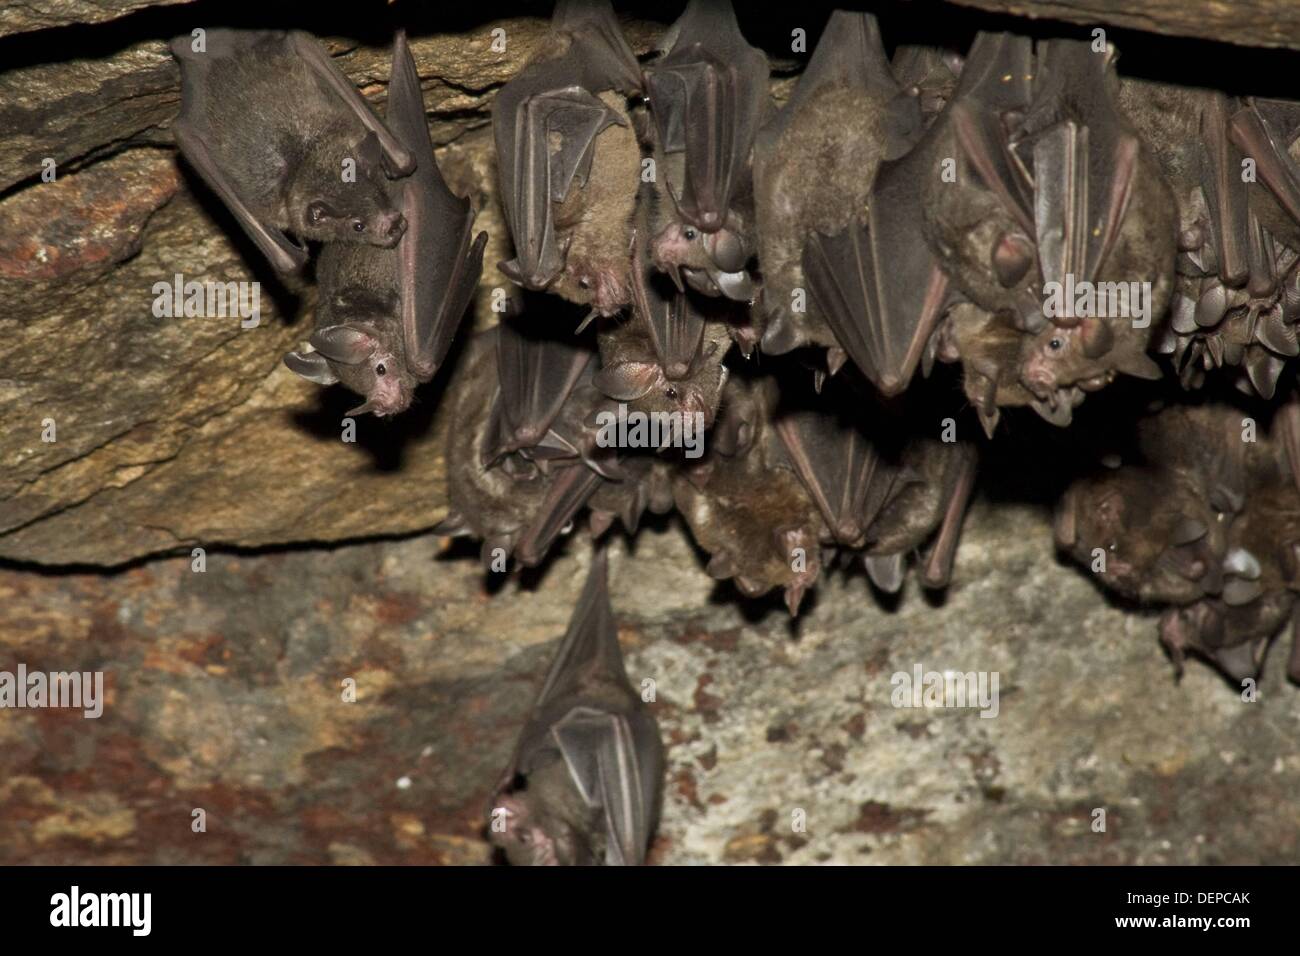 A Colony Of Bats Clinging To A Cave Ceiling Photographed In Costa